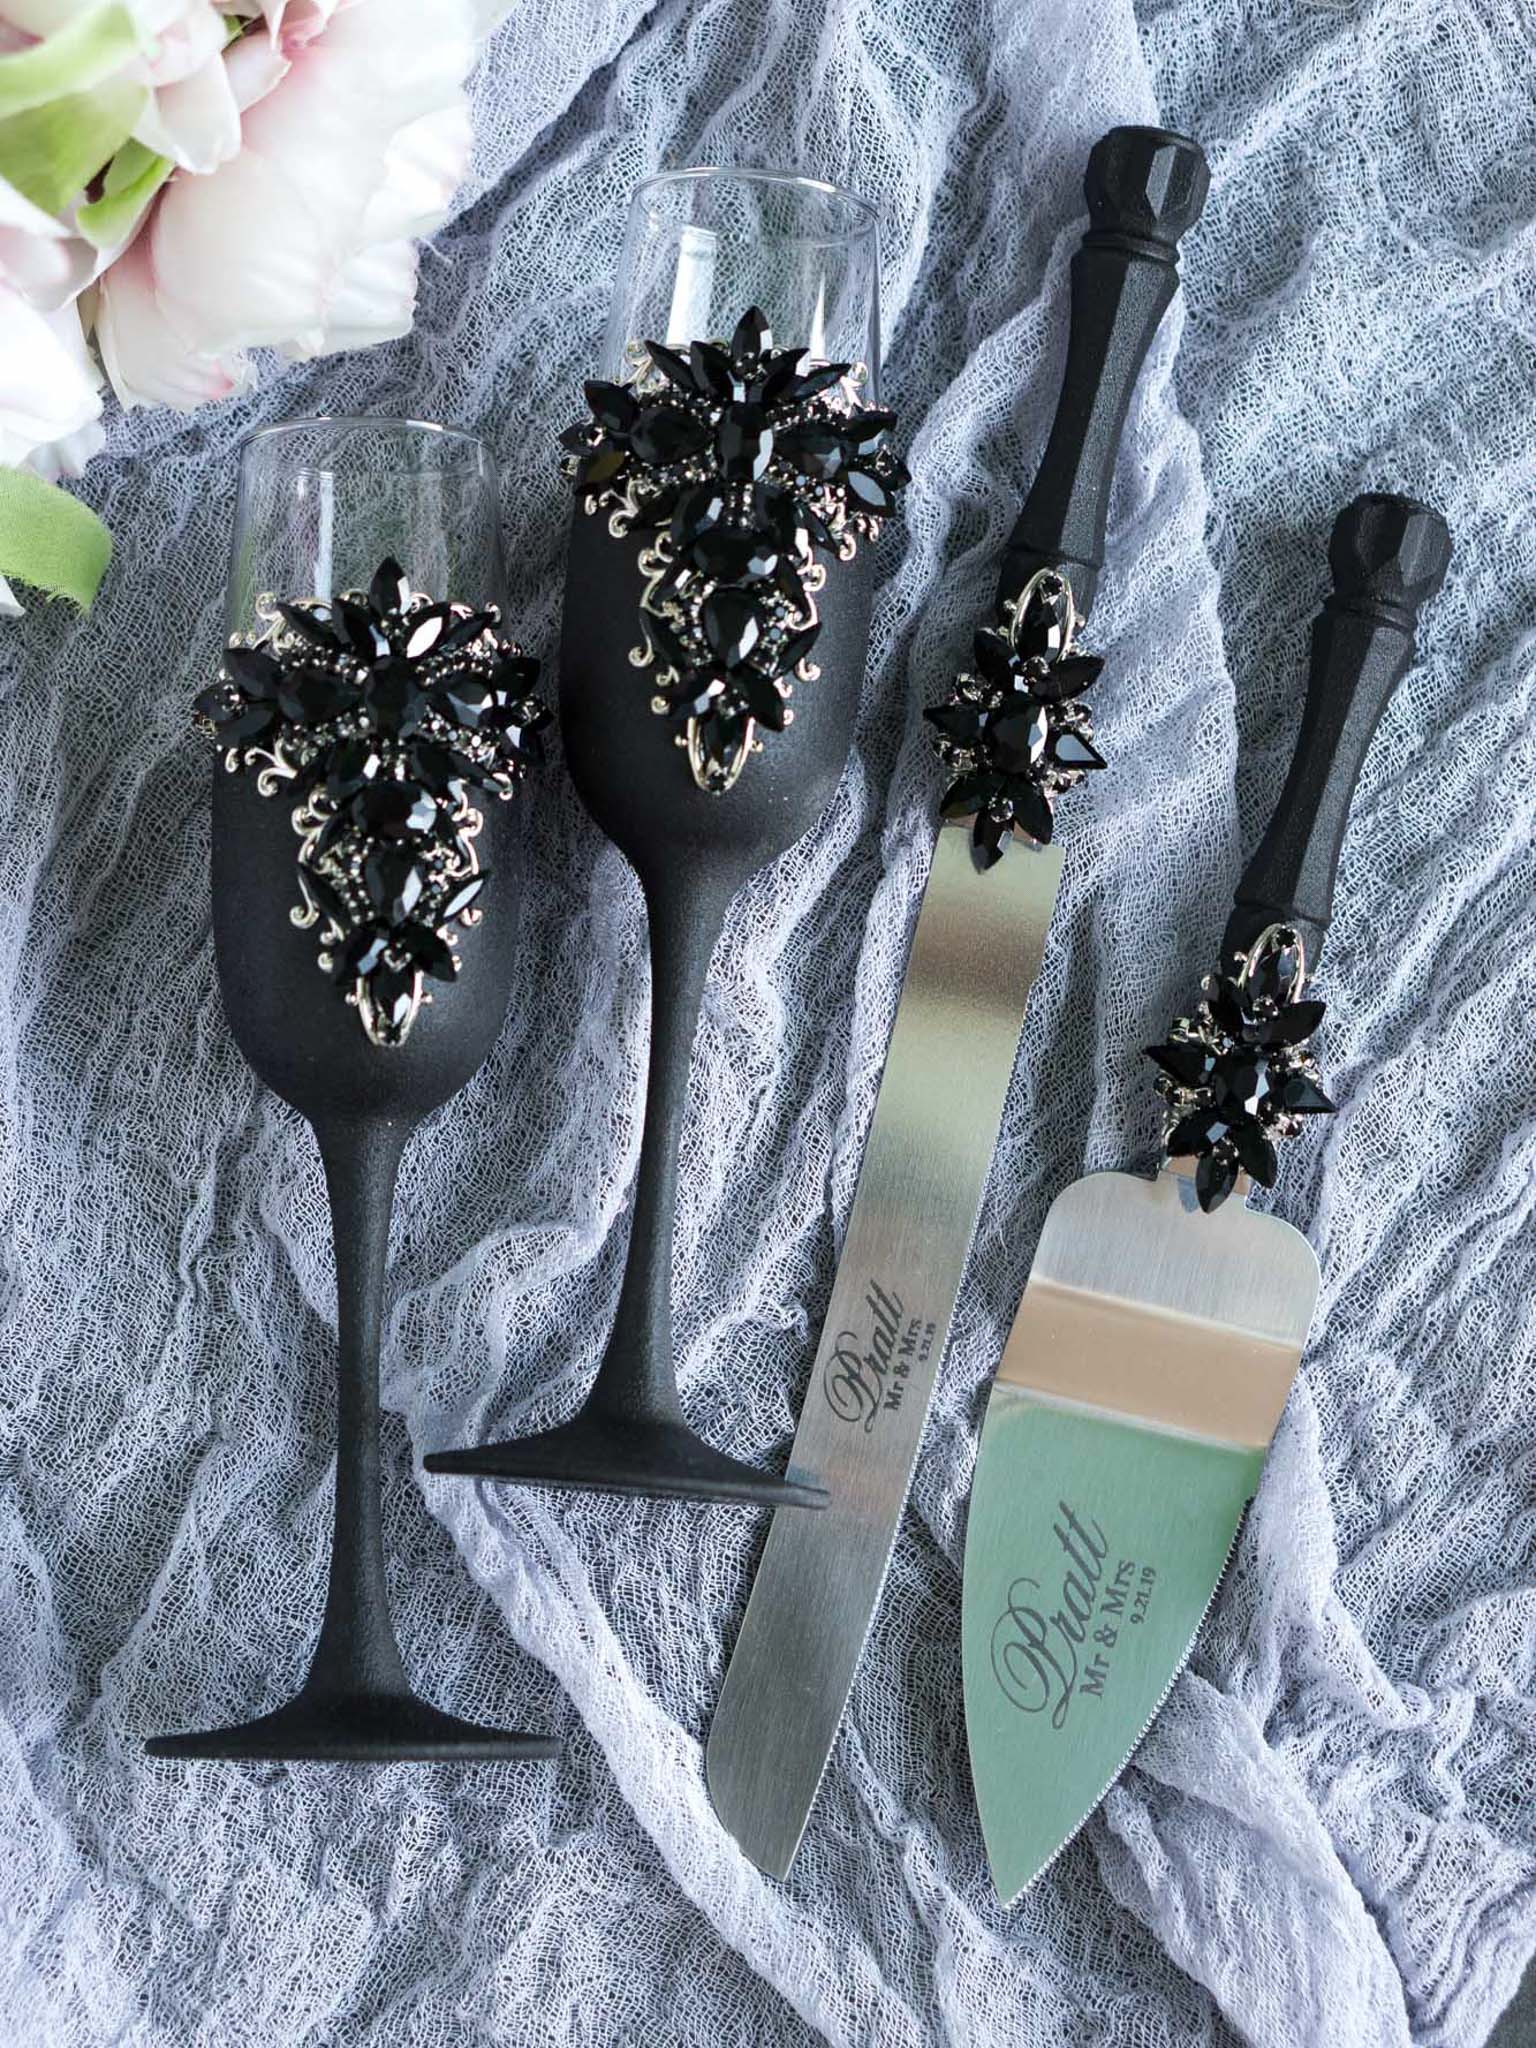 Gothic Wedding Champagne Flutes and Cake Serving Set